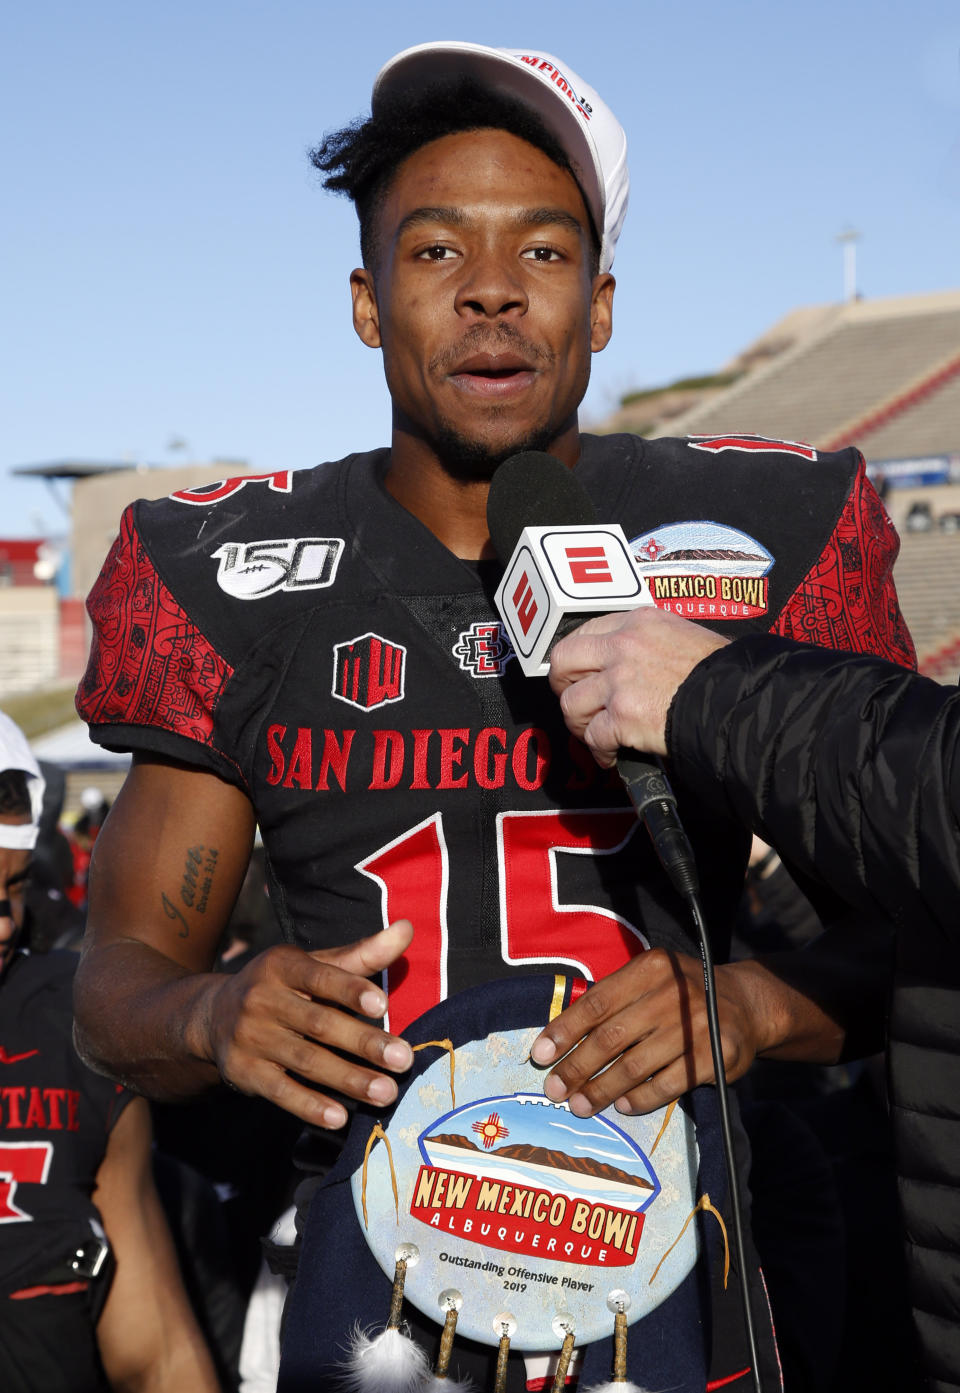 San Diego State running back Jordan Byrd, one of the two recipients of the offensive MVP award, speaks during the presentation of the New Mexico Bowl NCAA college football game on Saturday, Dec. 21, 2019 in Albuquerque, N.M. San Diego State beat Central Michigan 48-11. (AP Photo/Andres Leighton)